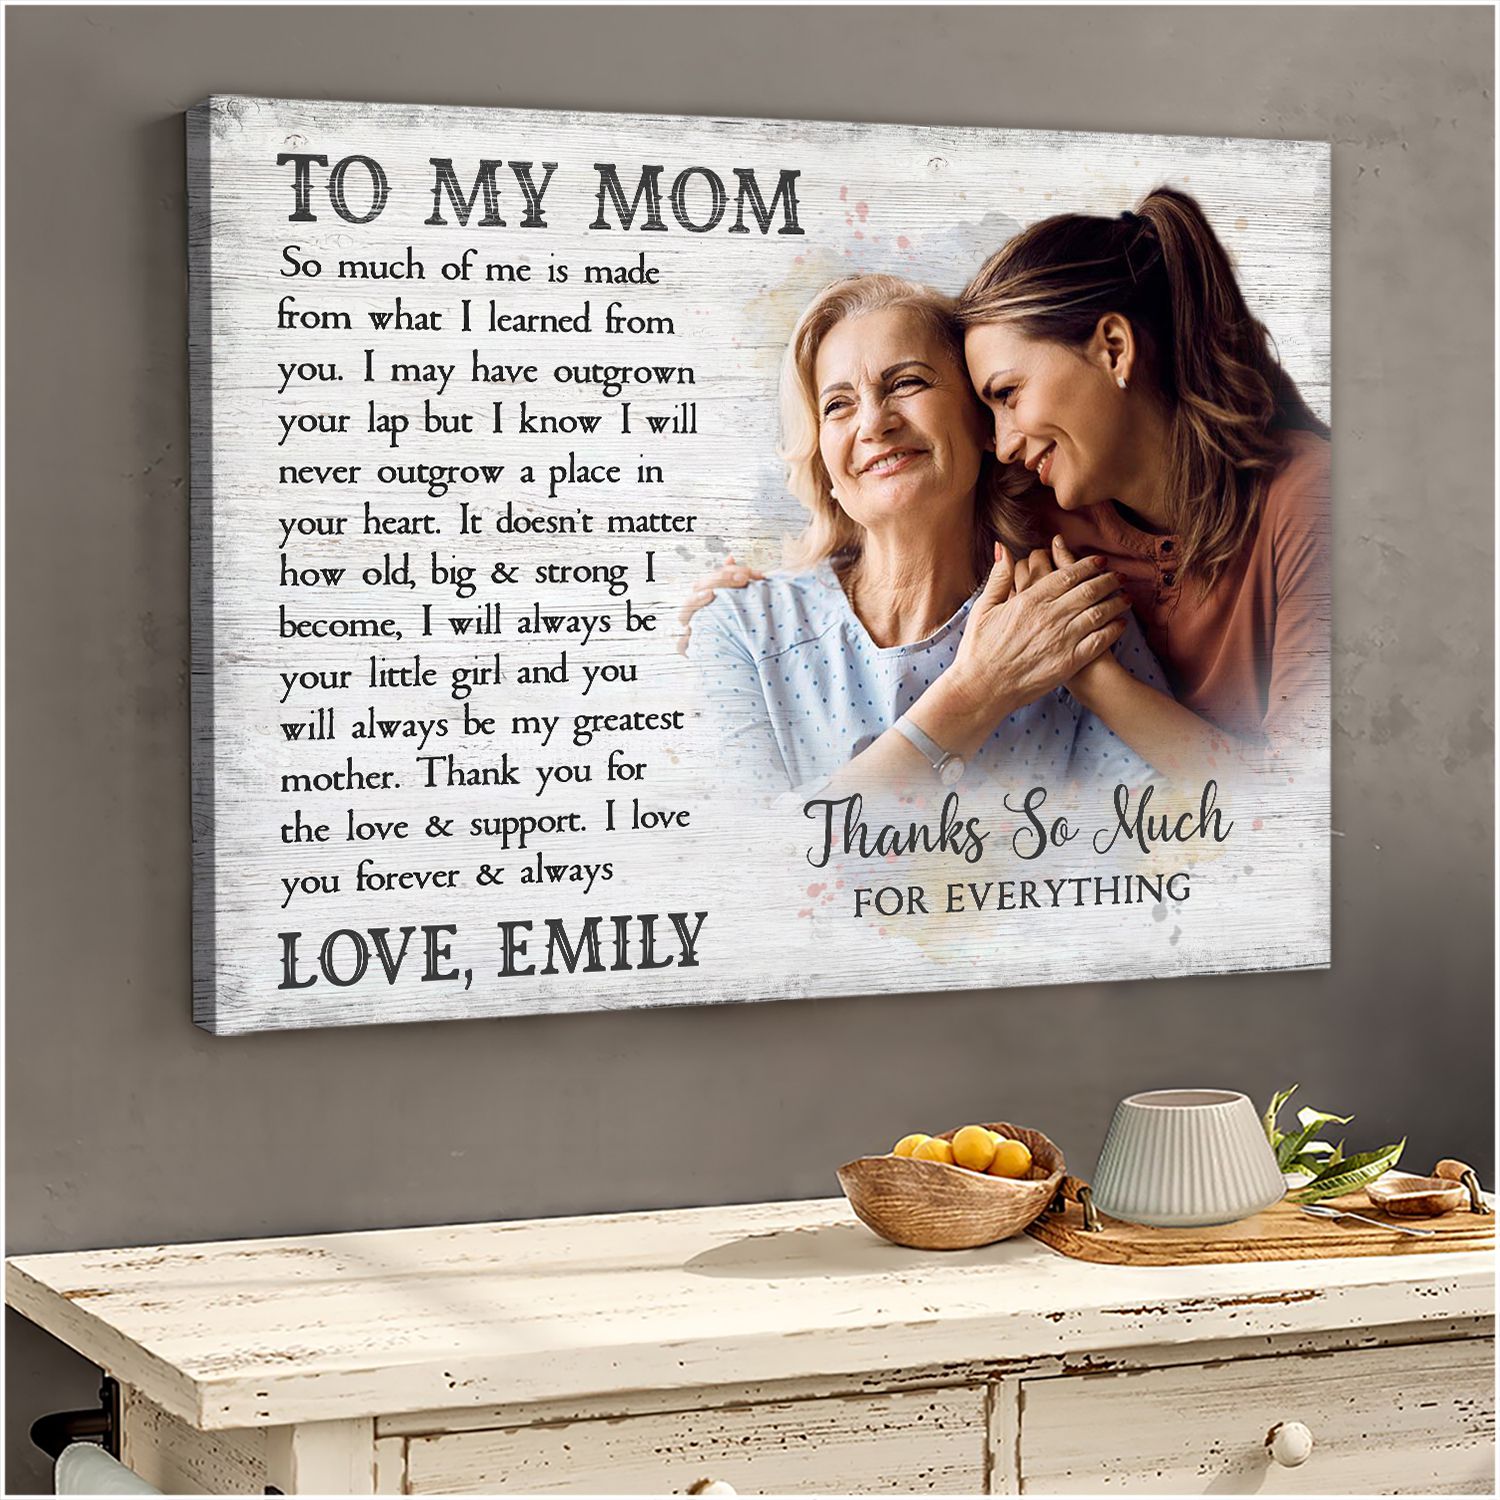 https://images.ohcanvas.com/ohcanvas_com/2023/02/07023856/customized-mothers-day-gift-from-daughter-to-my-mom-canvas-print-1.jpg